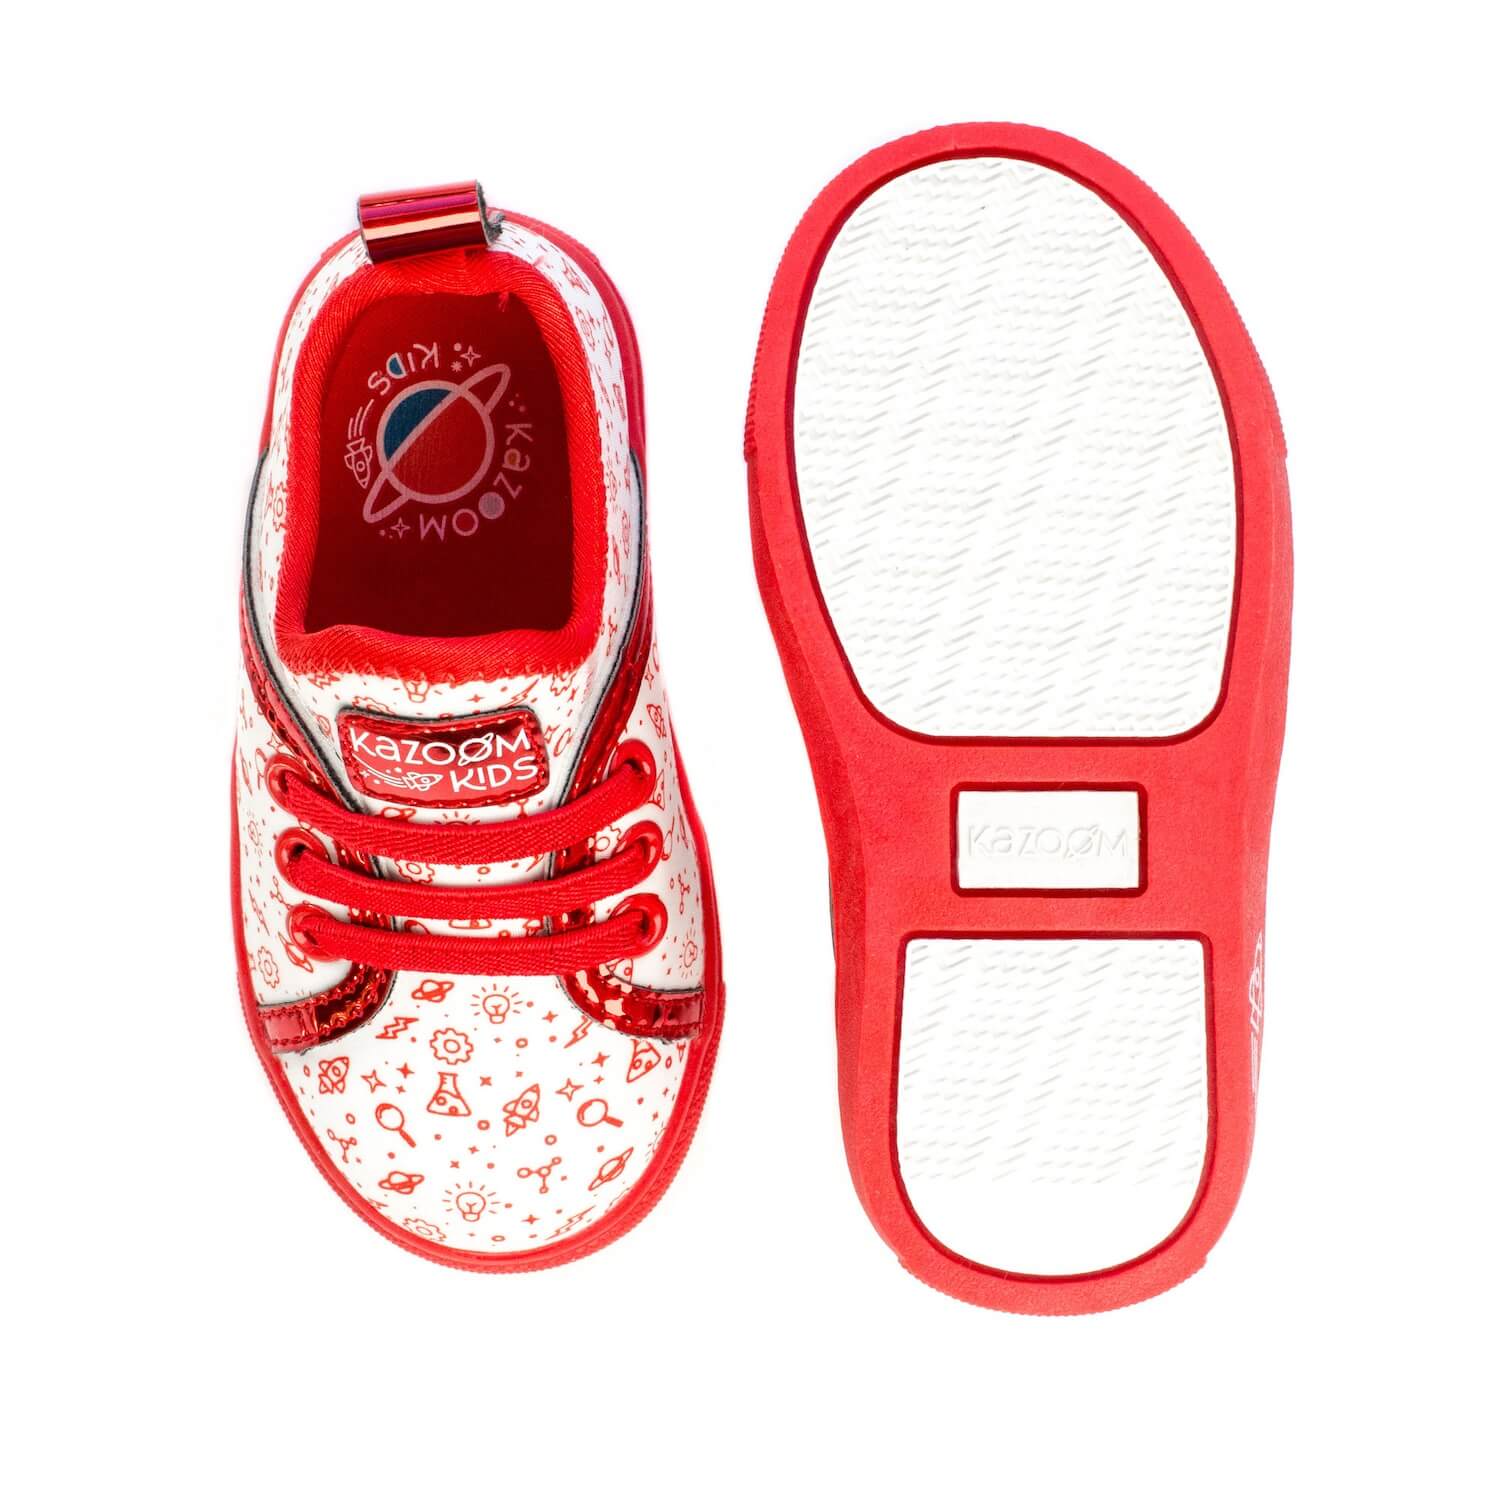 Science Class- Red and White Toddler Shoes